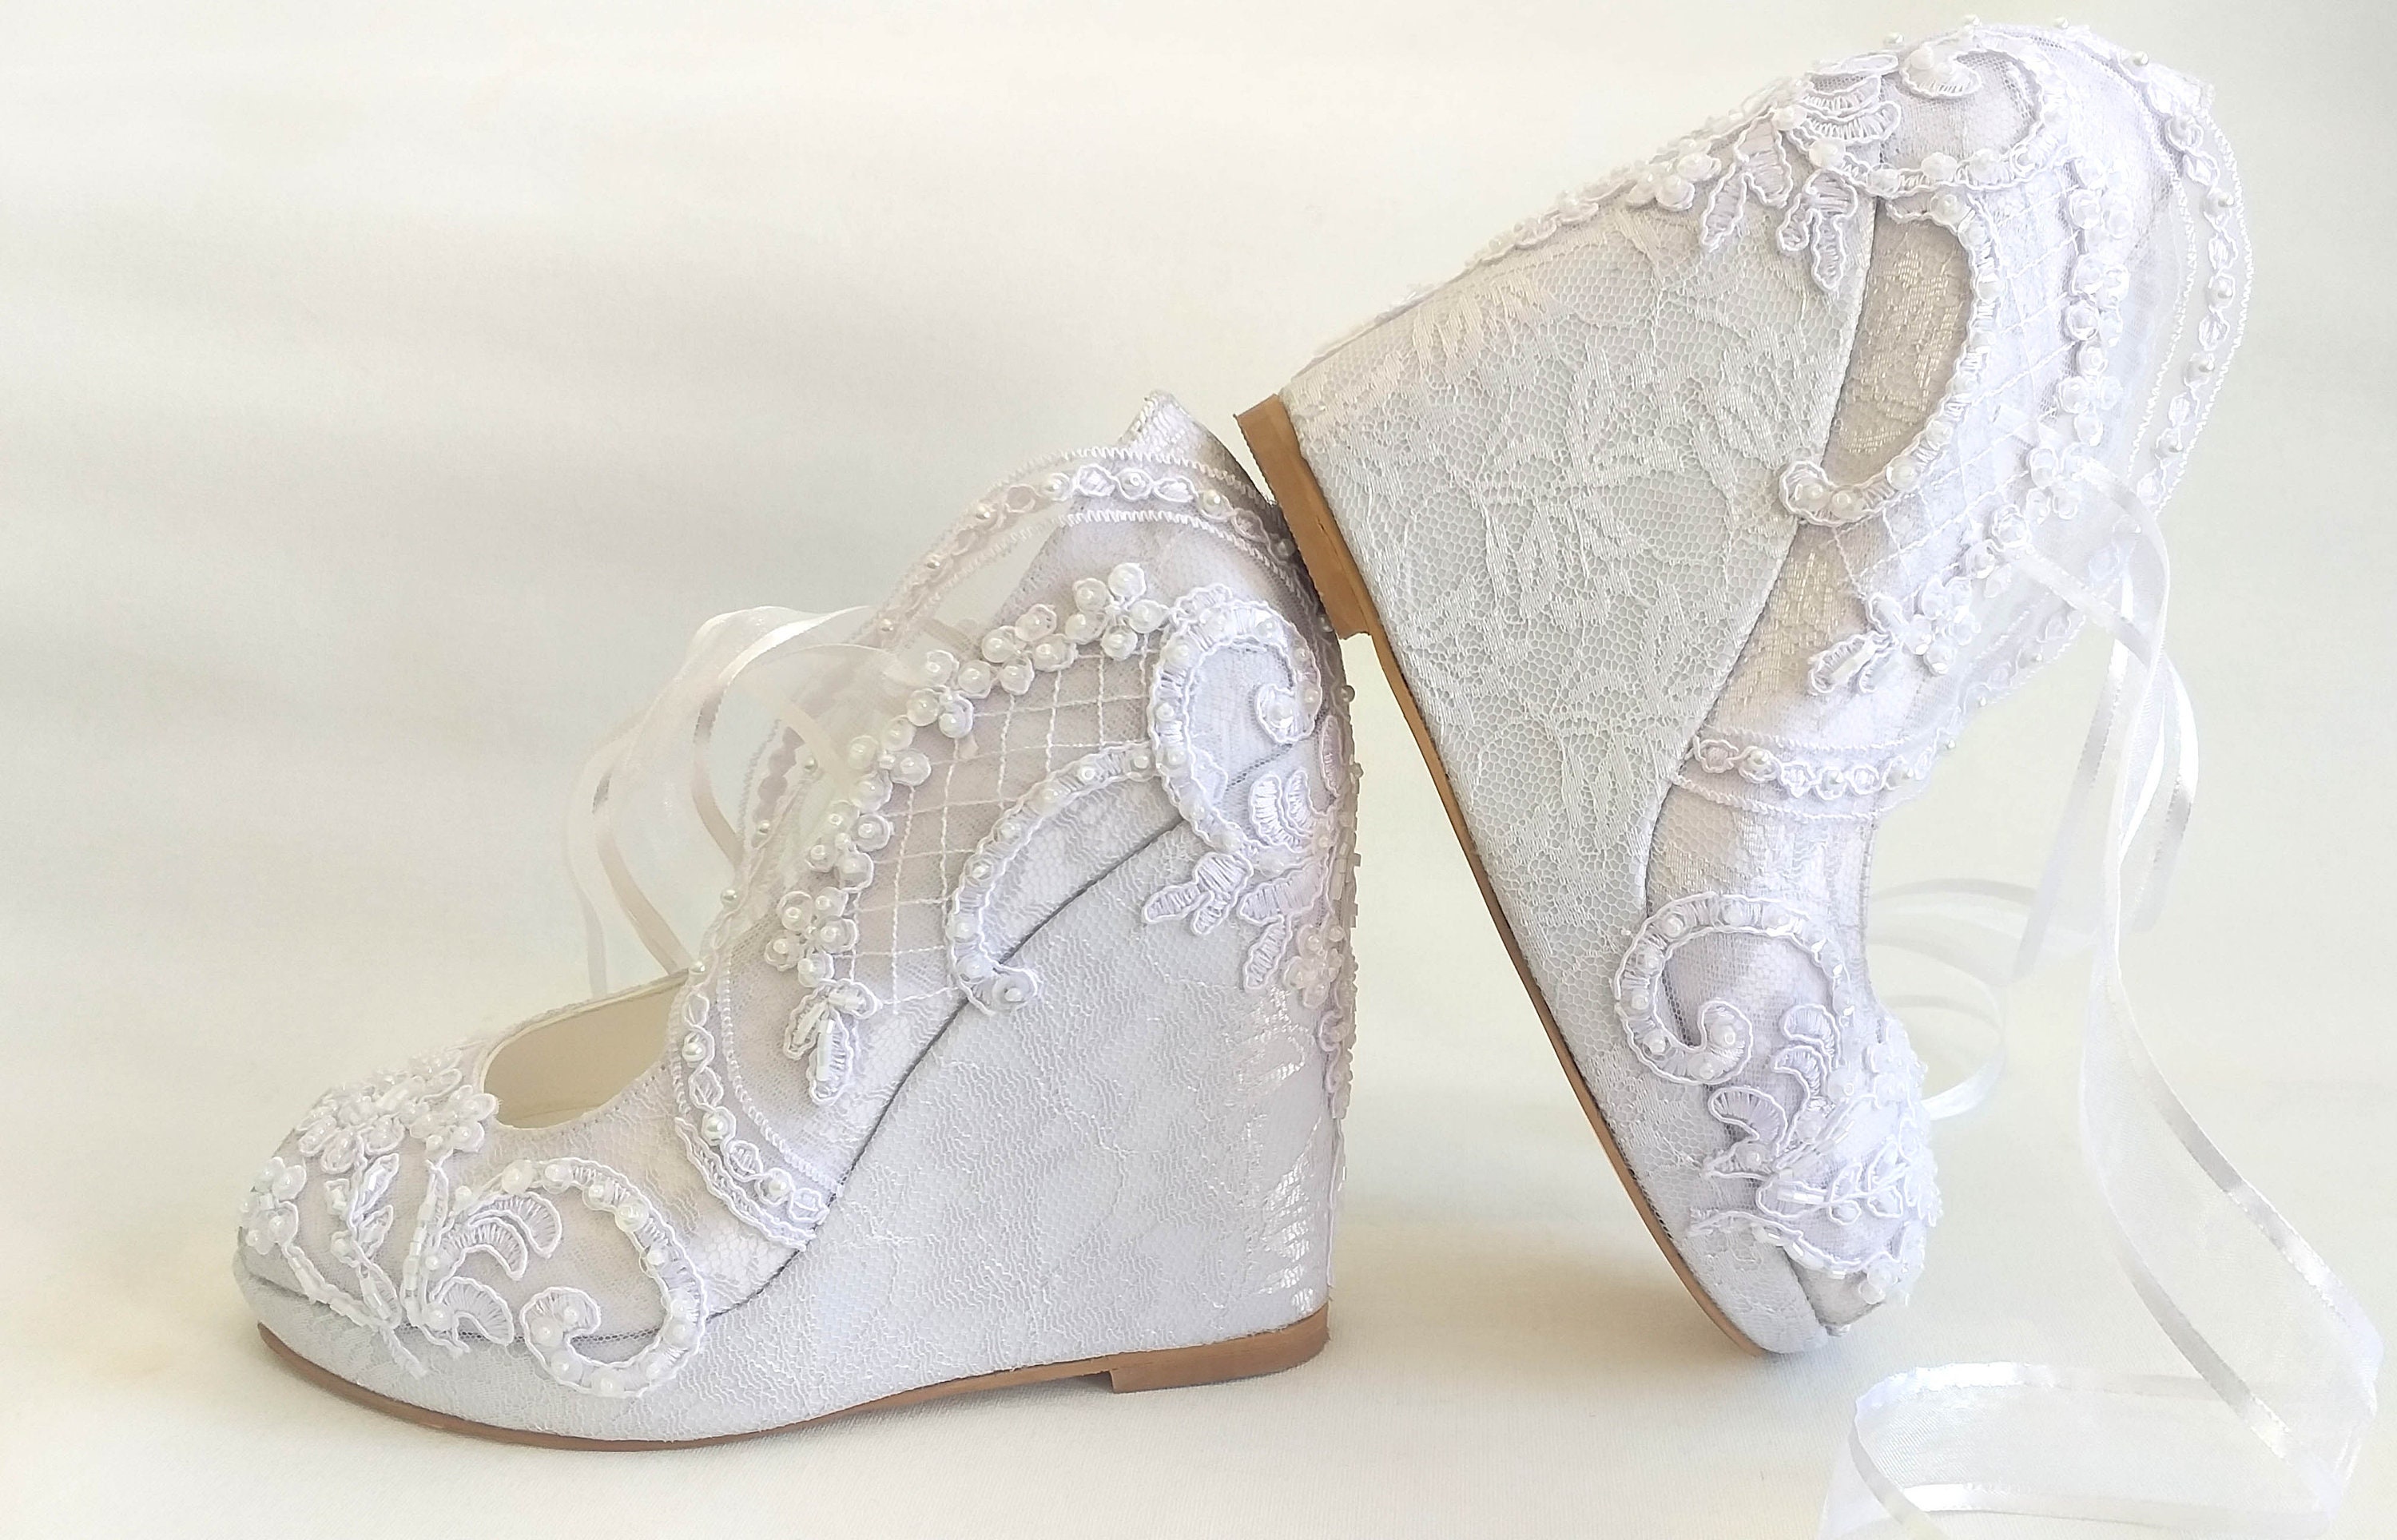 Bling Wedding Shoes, Ivory Satin and Lace Bridal Shoes with Rhinestones